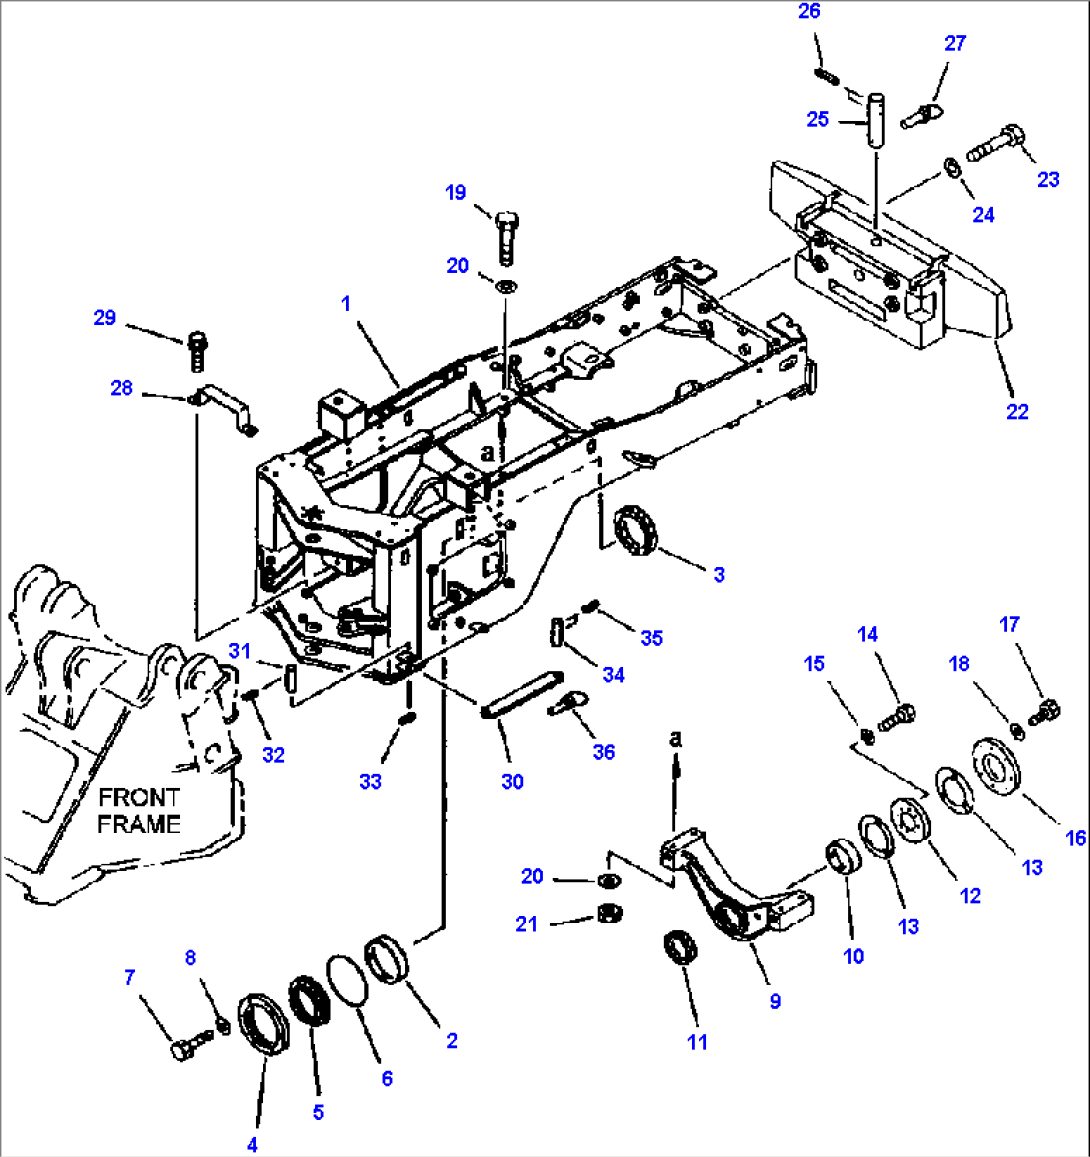 FIG NO. 5011 REAR FRAME AND COUNTERWEIGHT